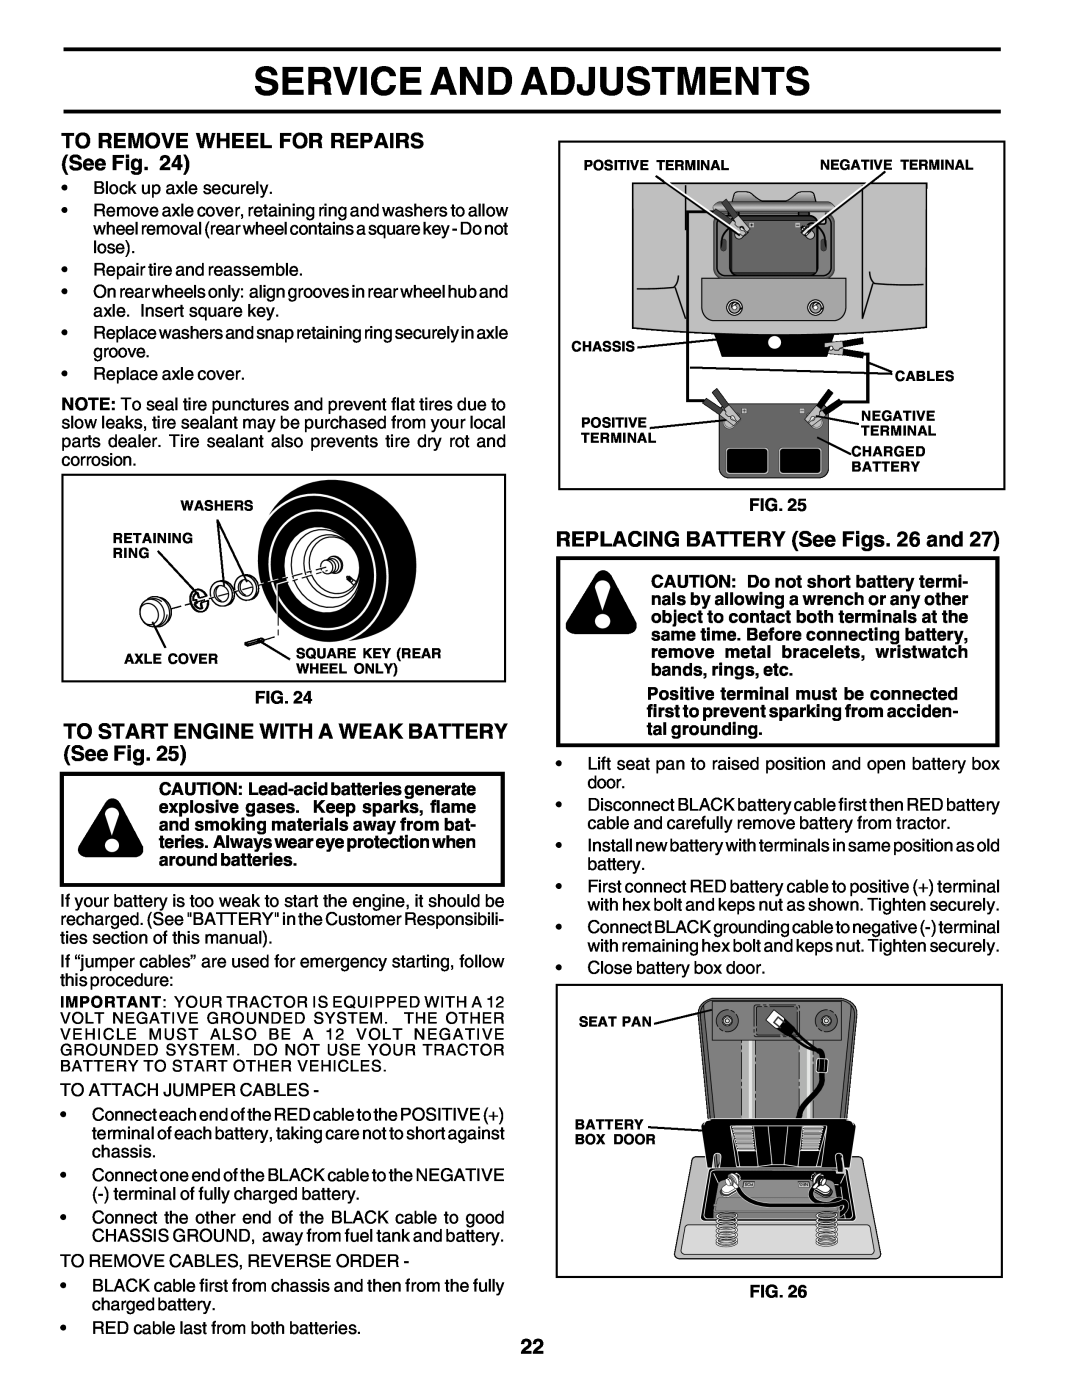 Weed Eater 180530 manual Service And Adjustments, TO REMOVE WHEEL FOR REPAIRS See Fig, REPLACING BATTERY See Figs. 26 and 